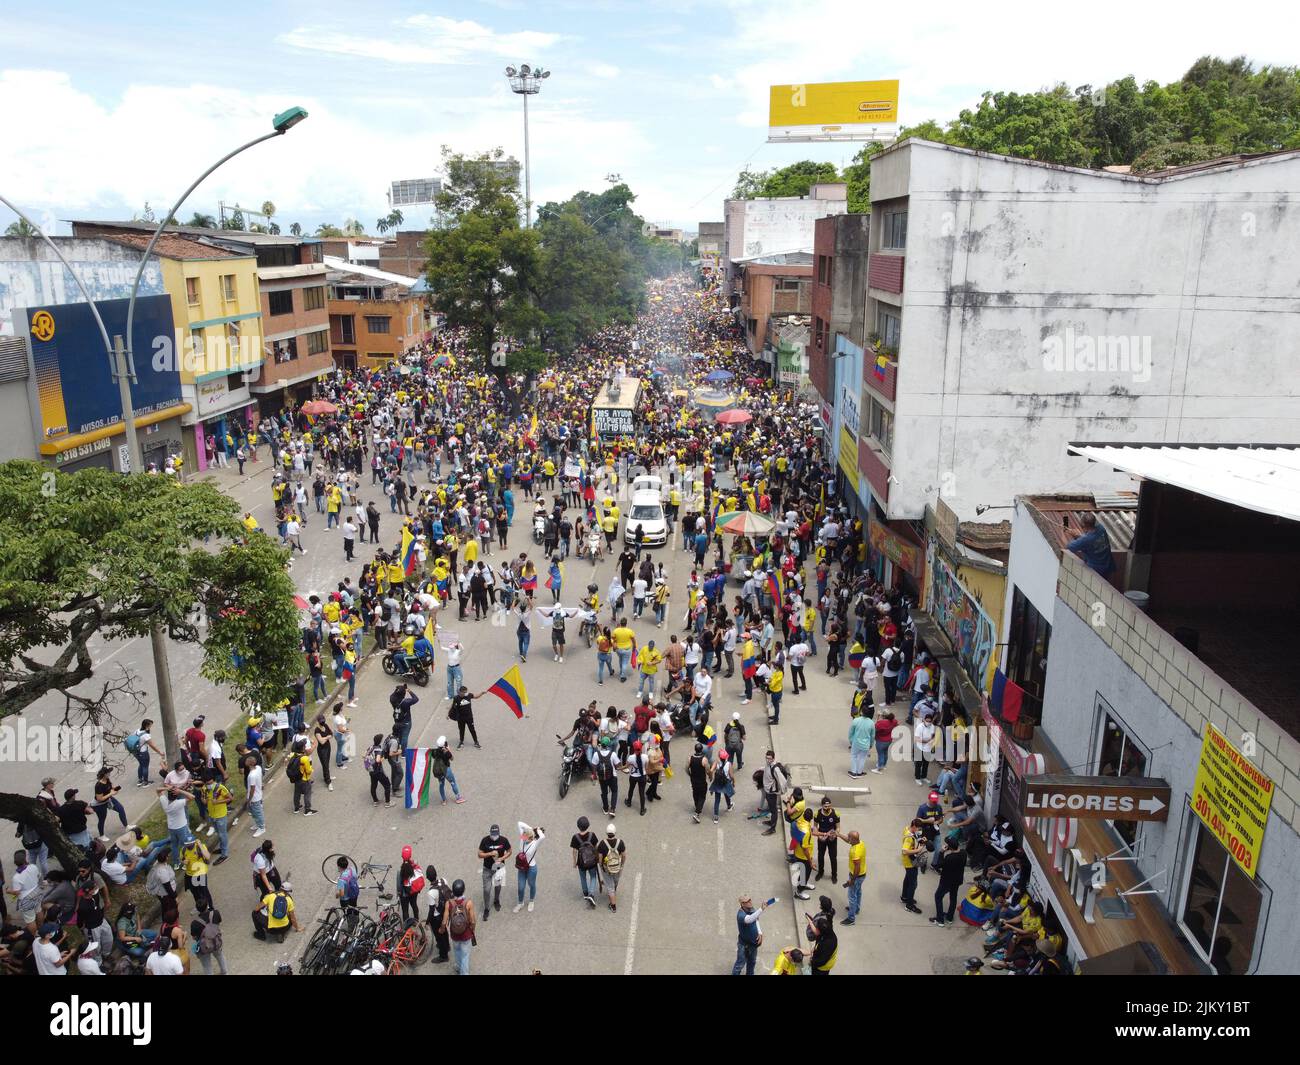 An aerial view of a crowd during a demonstration in Cali, Colombia Stock Photo